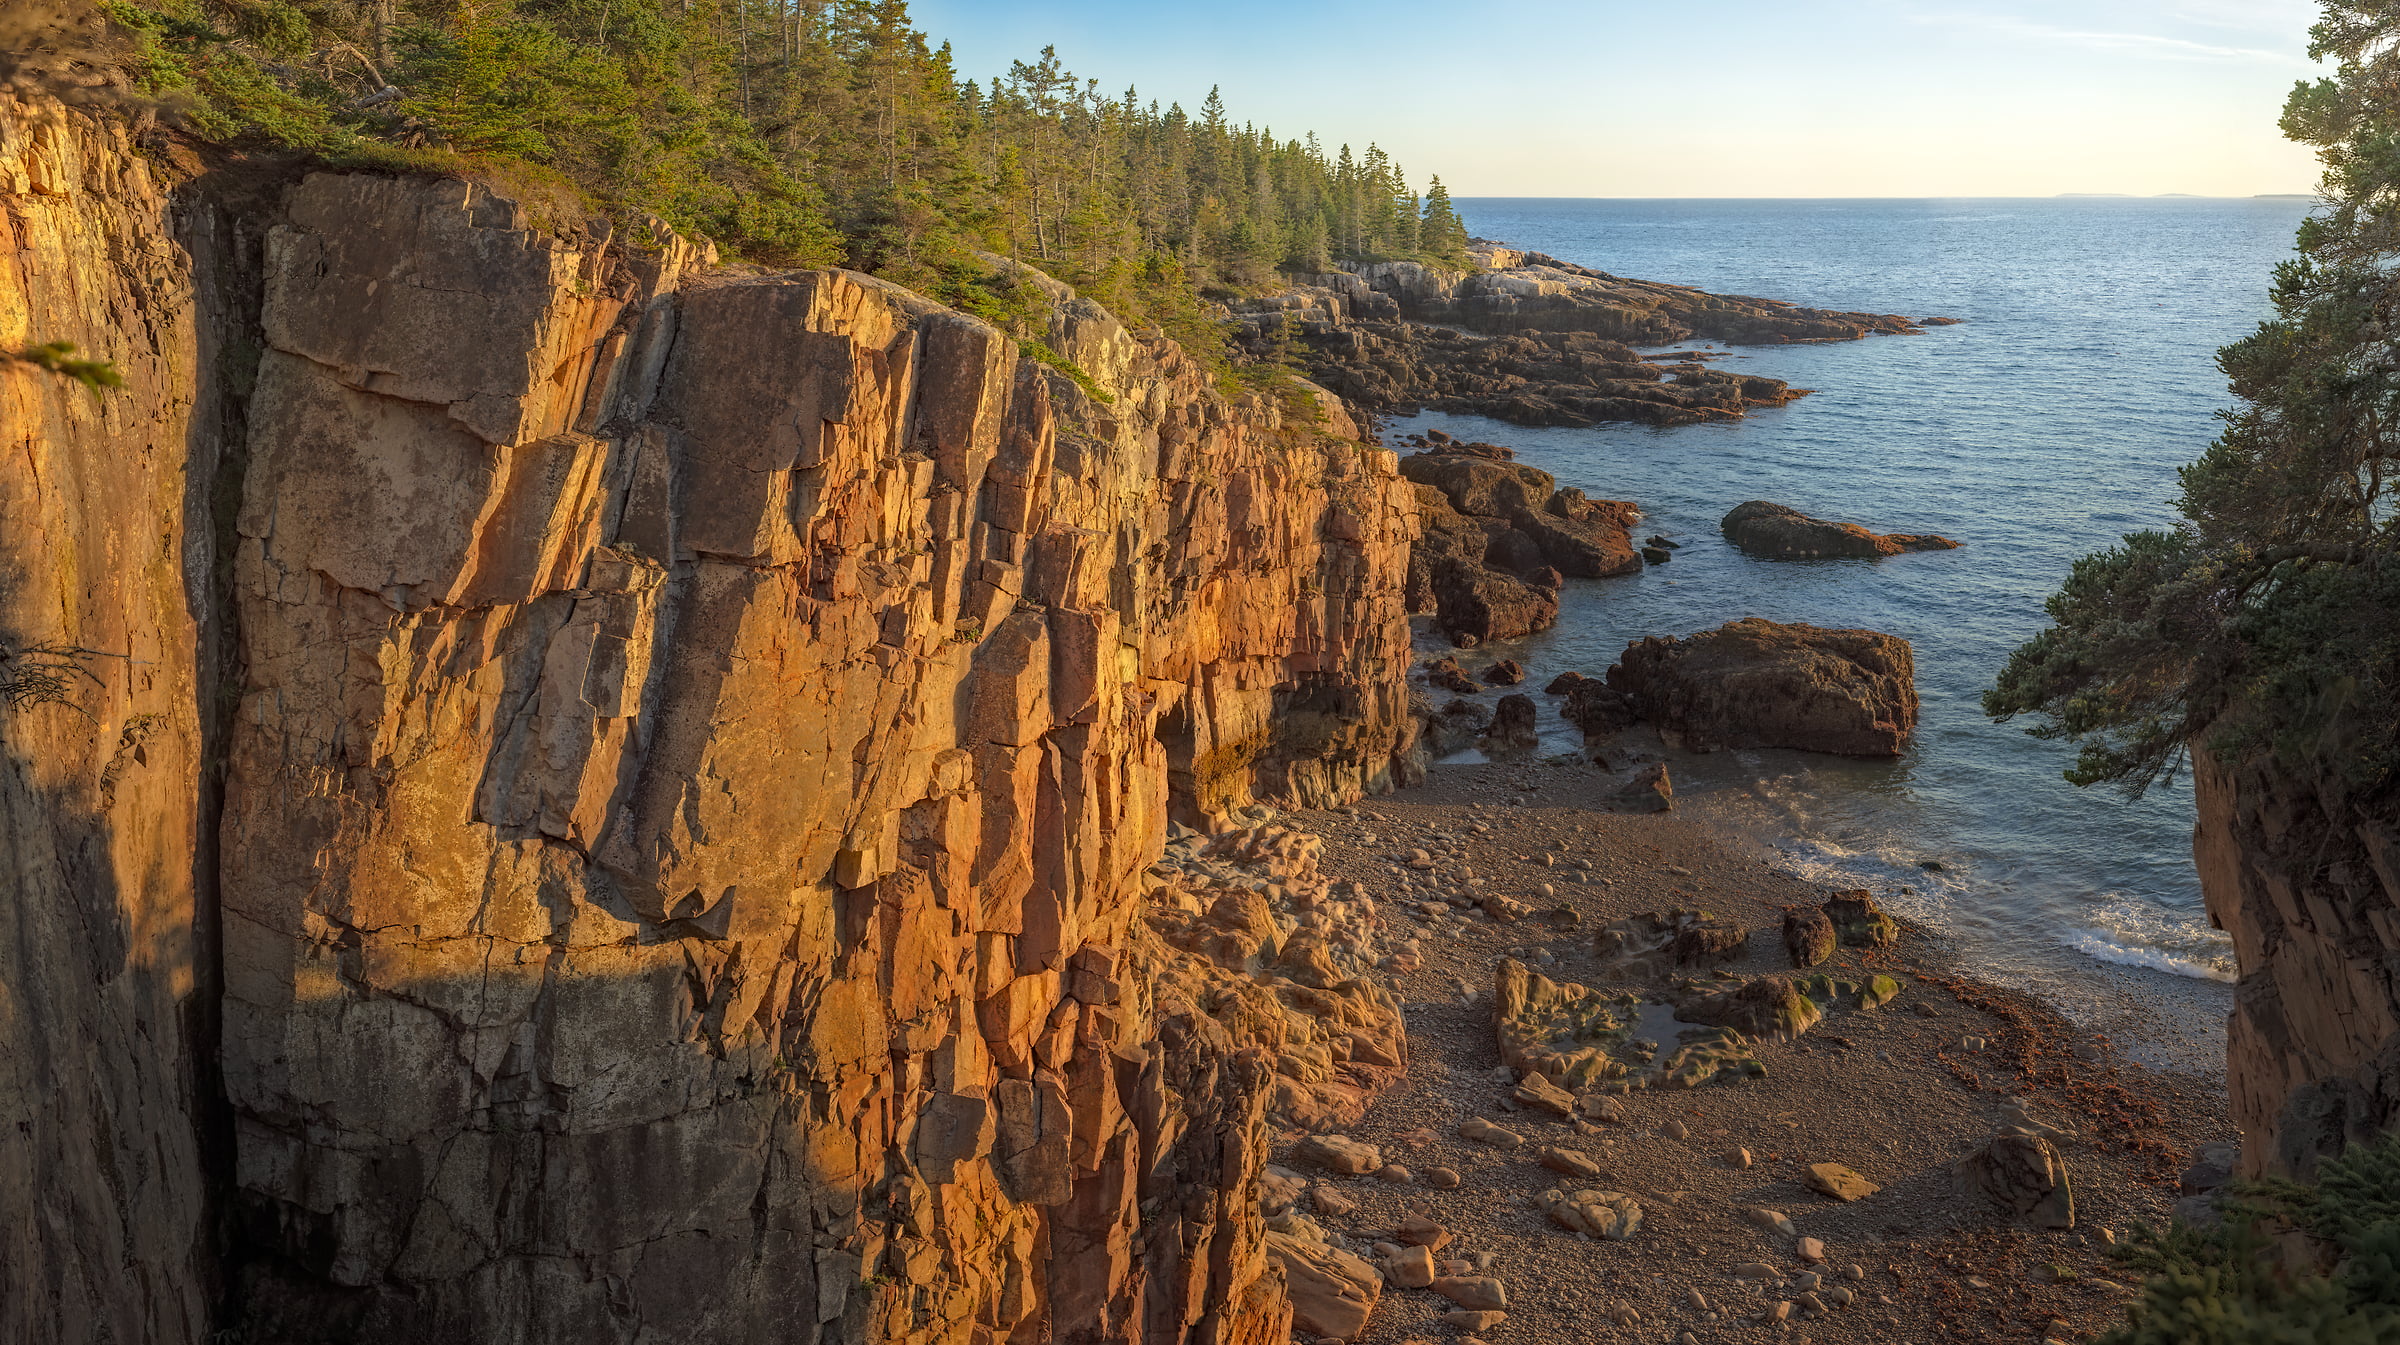 2,288 megapixels! A very high resolution, large-format VAST photo print of the Maine coastline at sunset; landscape photograph created by John Freeman in Acadia National Park, Winter Harbor, Maine